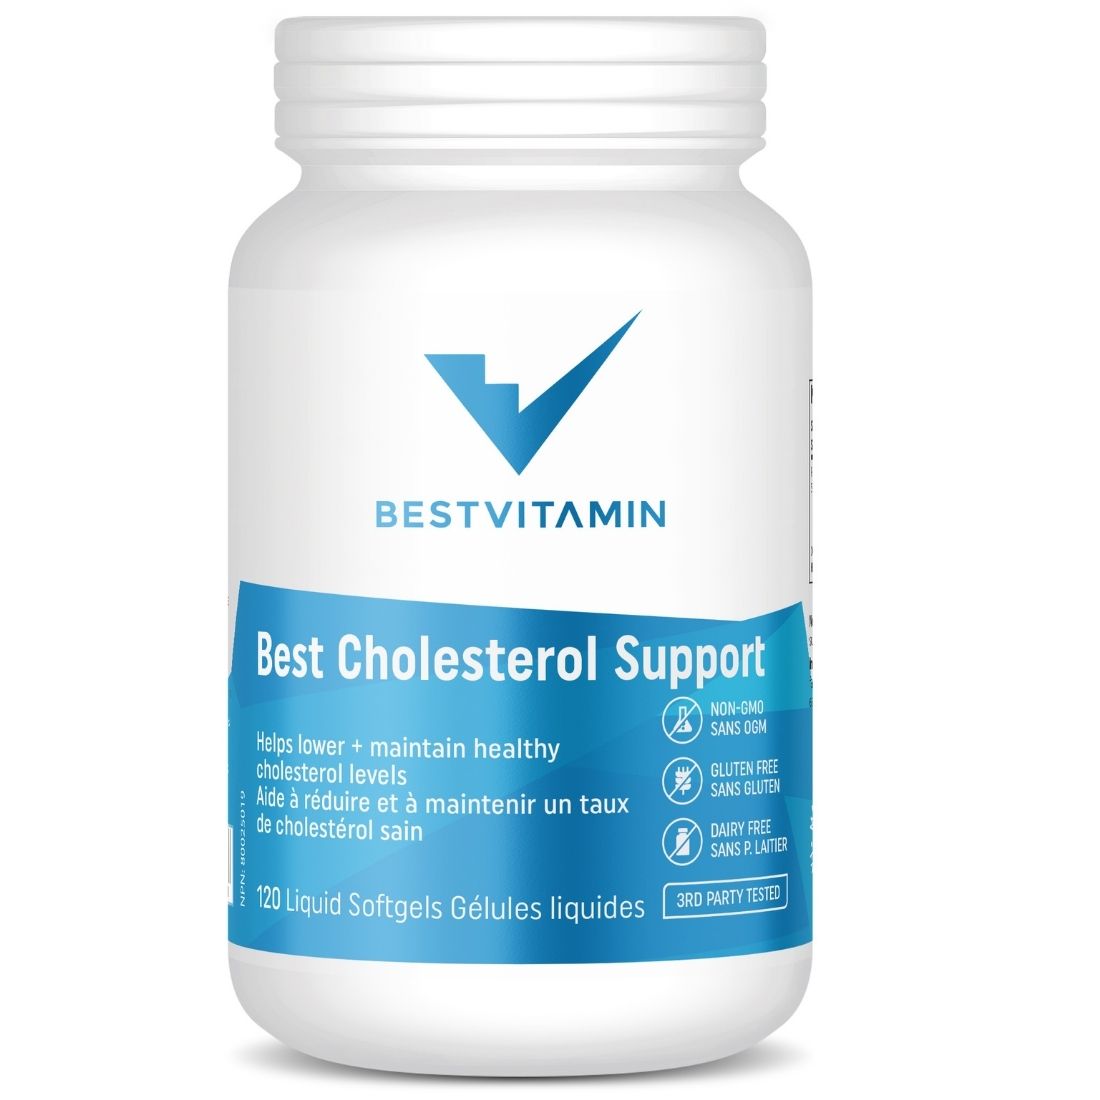 BestVitamin Best Cholesterol Support, Helps lower & maintain healthy cholesterol levels, 120 Liquid Softgels, Clearance 50% Off, Final Sale